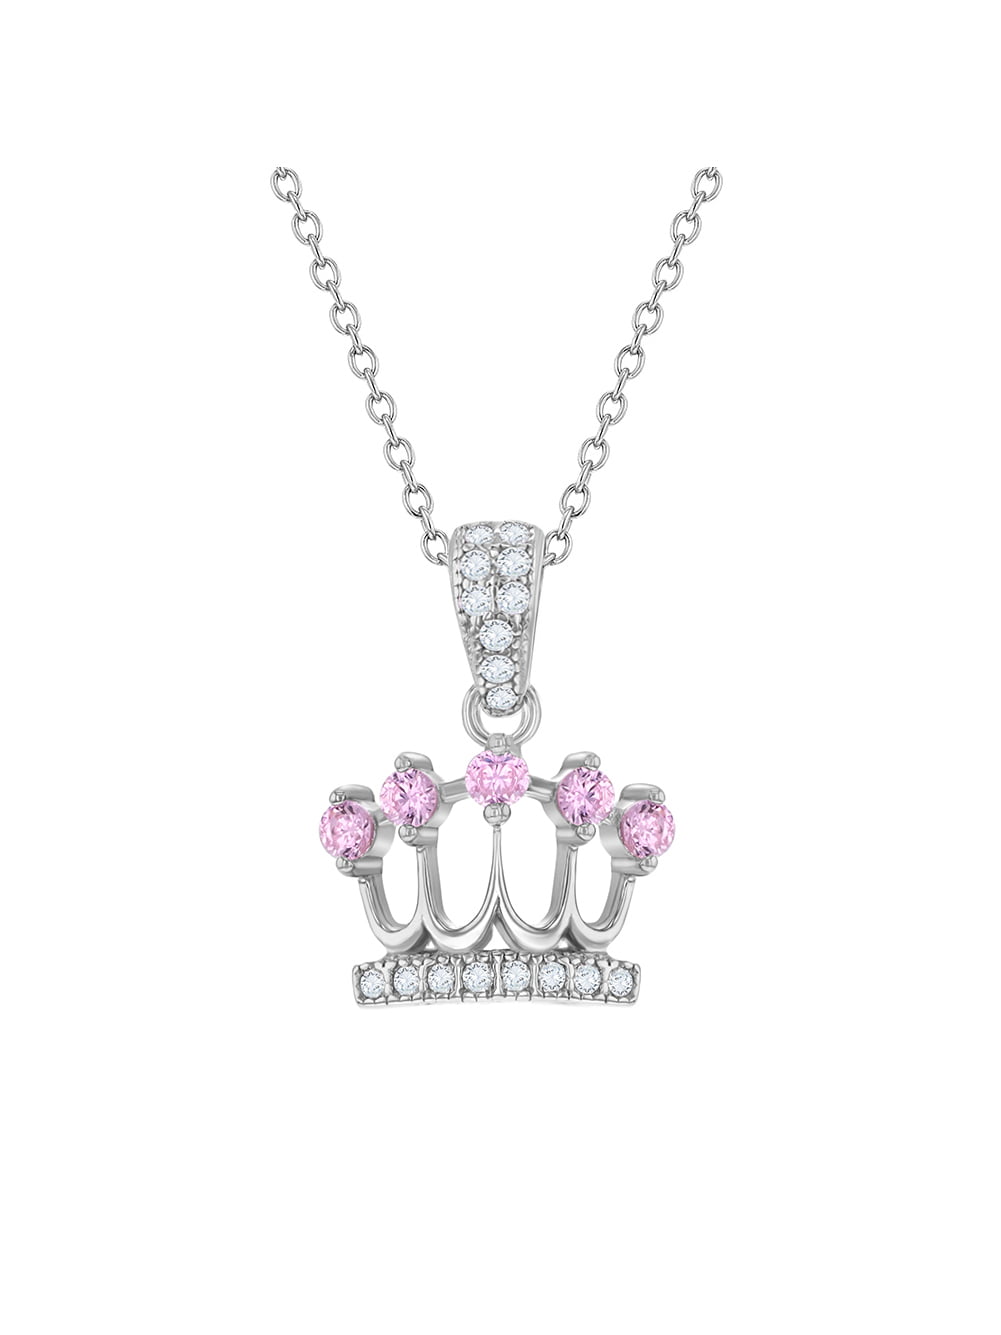 925 Sterling Silver Princess Crown Necklace Pendant Girls Pre Teens Pink CZ 16" 